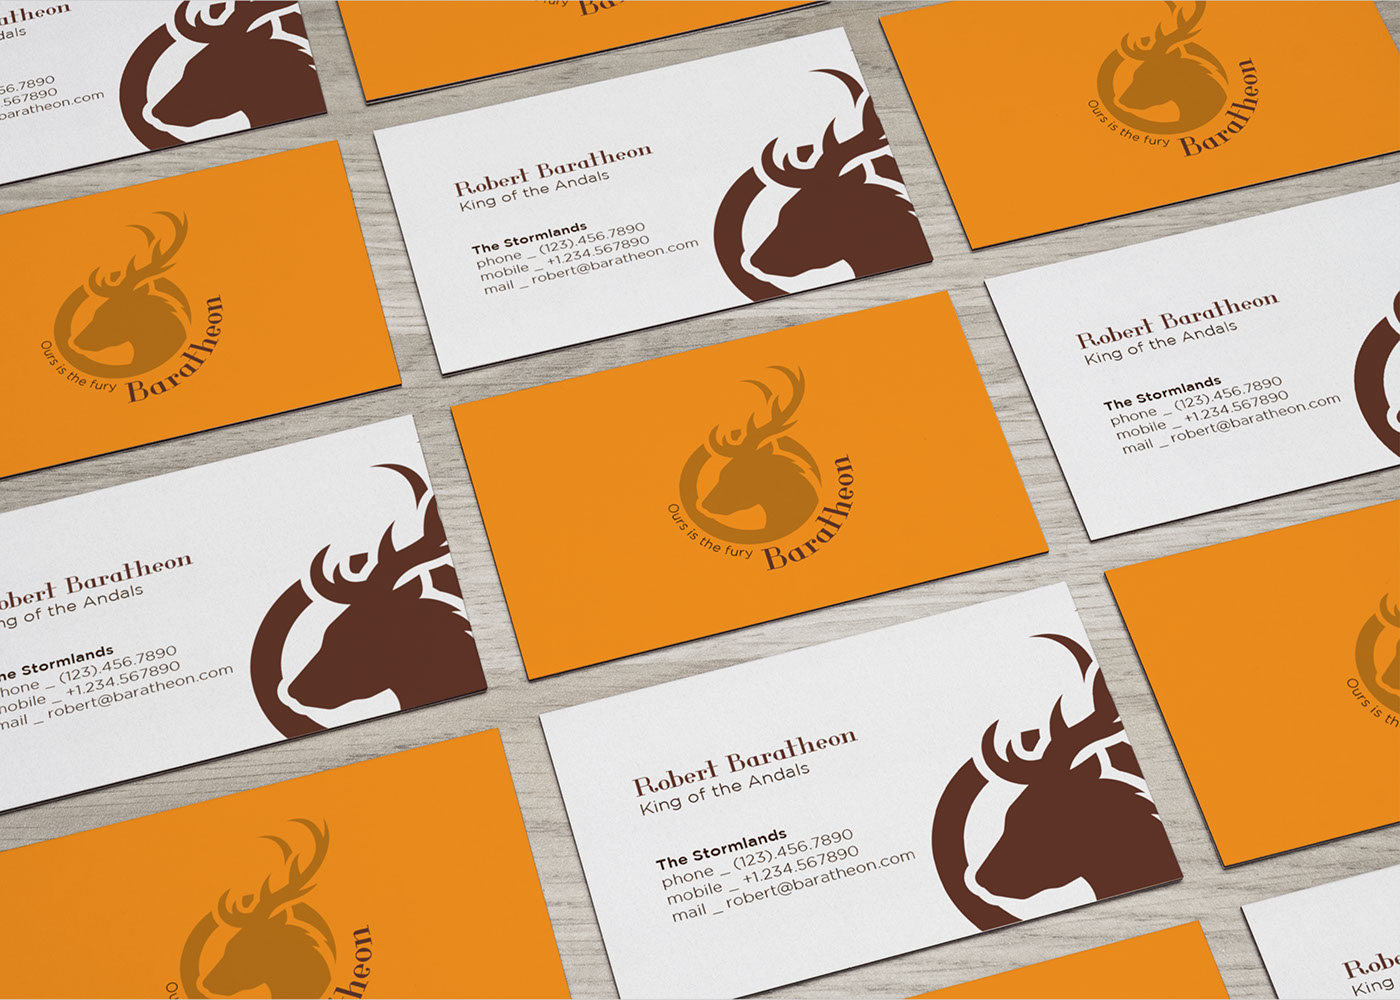 Game of Thrones got logo brand business card free Mockup Trono di spade hbo Television series